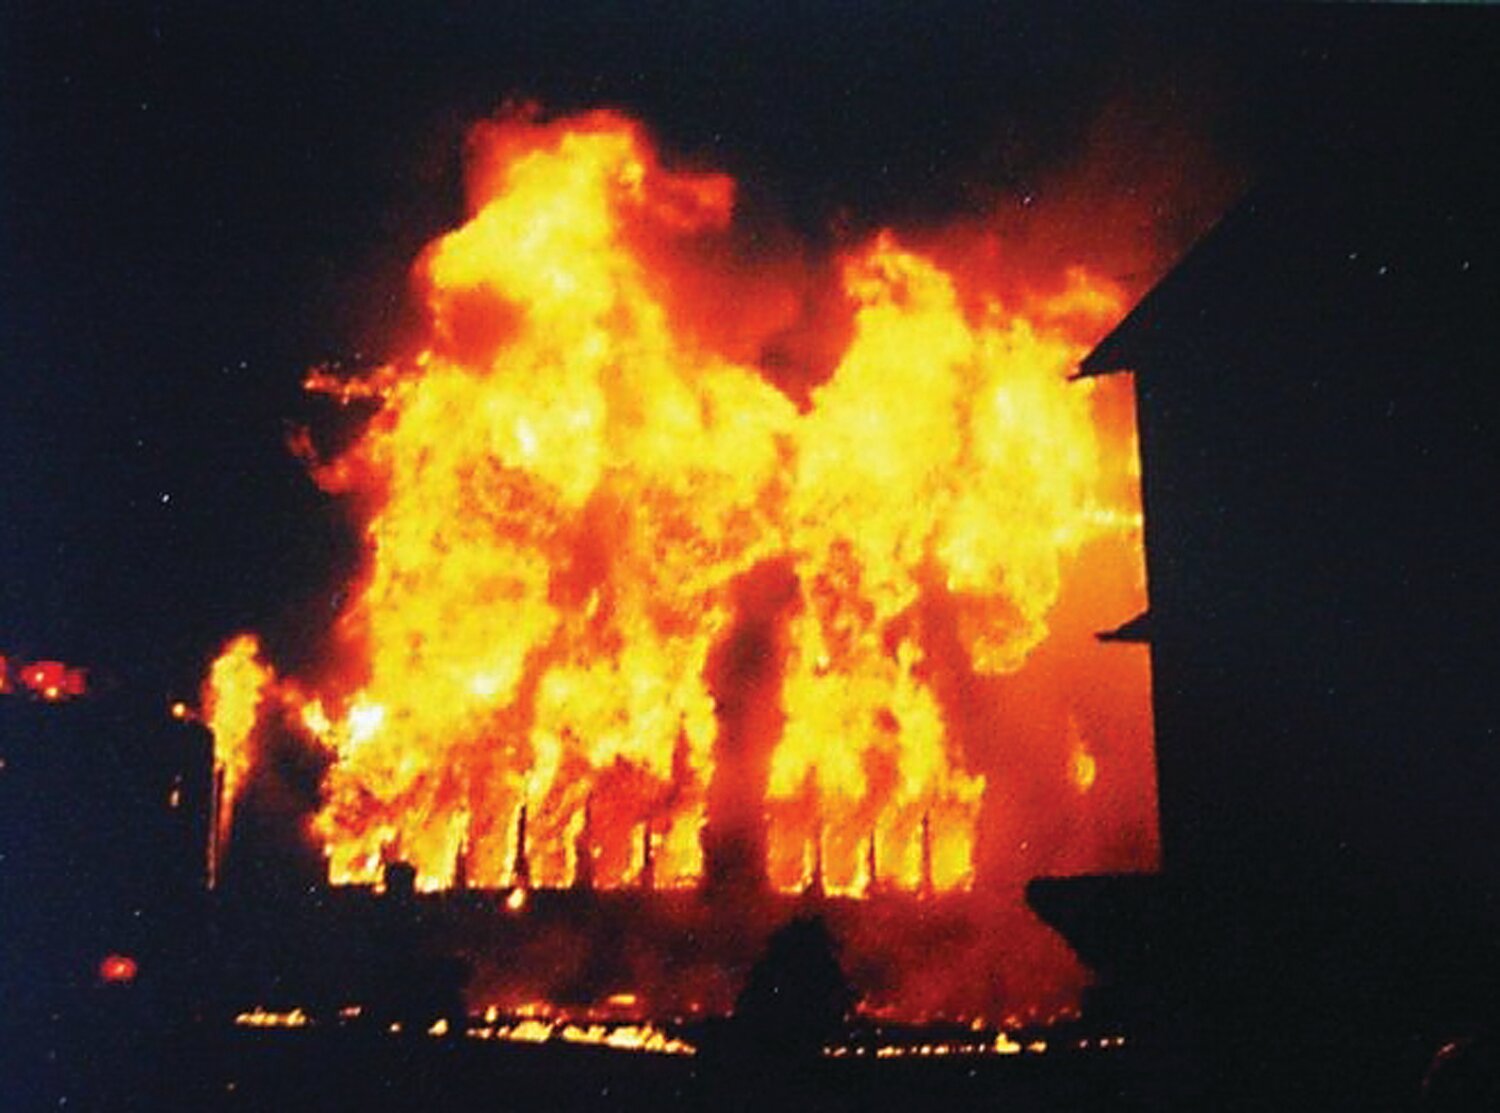 Flames leapt high in the area early on Jan. 5, 1998 as Ivyland Borough Hall burned.